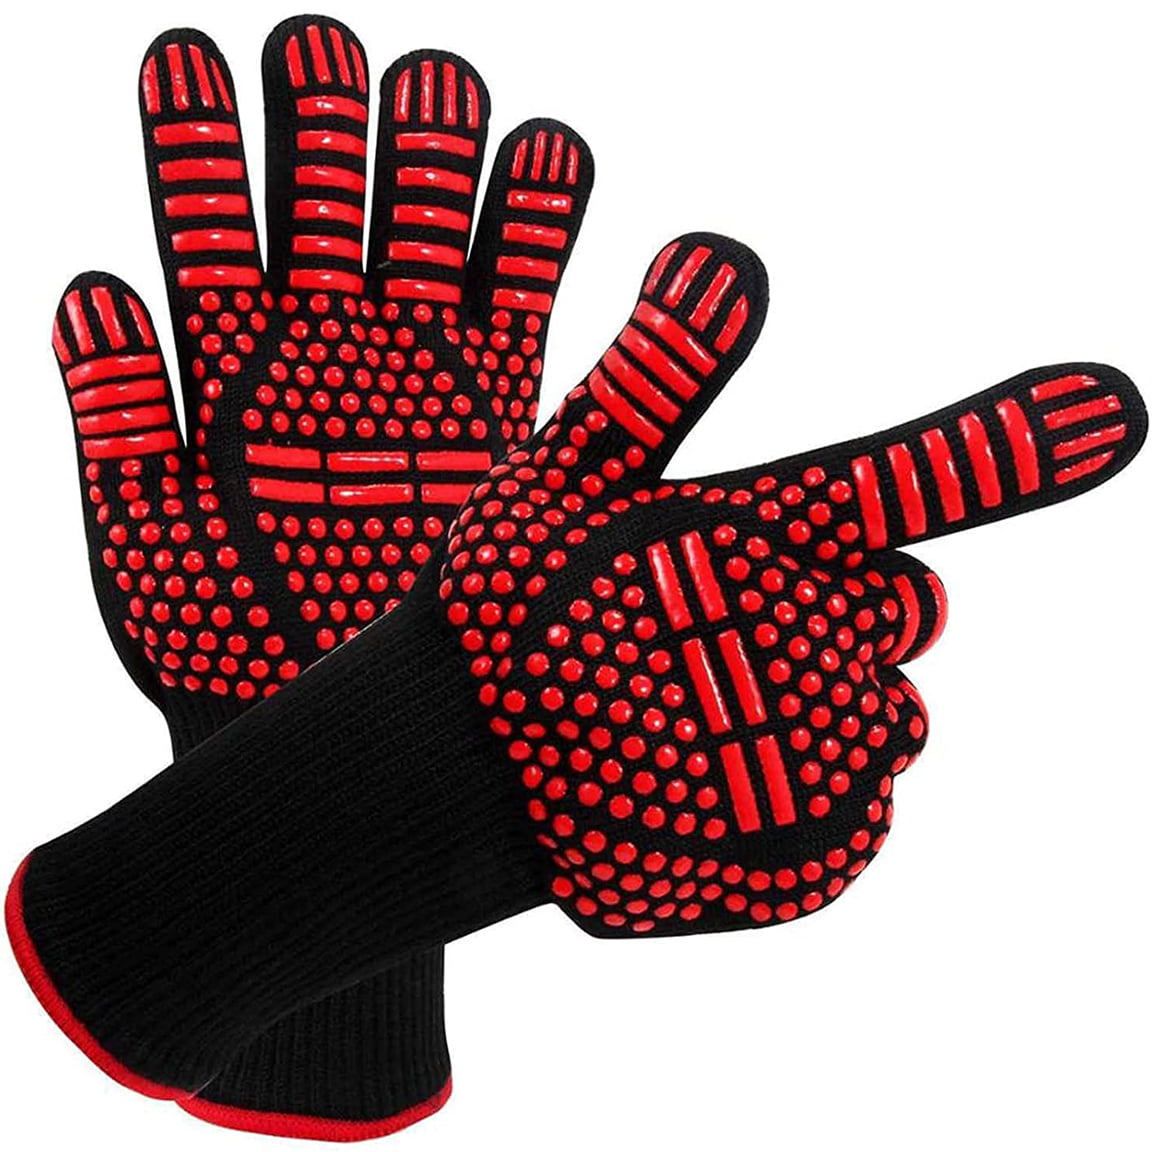 BBQ Grill Gloves 1472℉ Extreme Griller Heat Resistant Oven Mitts Glove Silic 